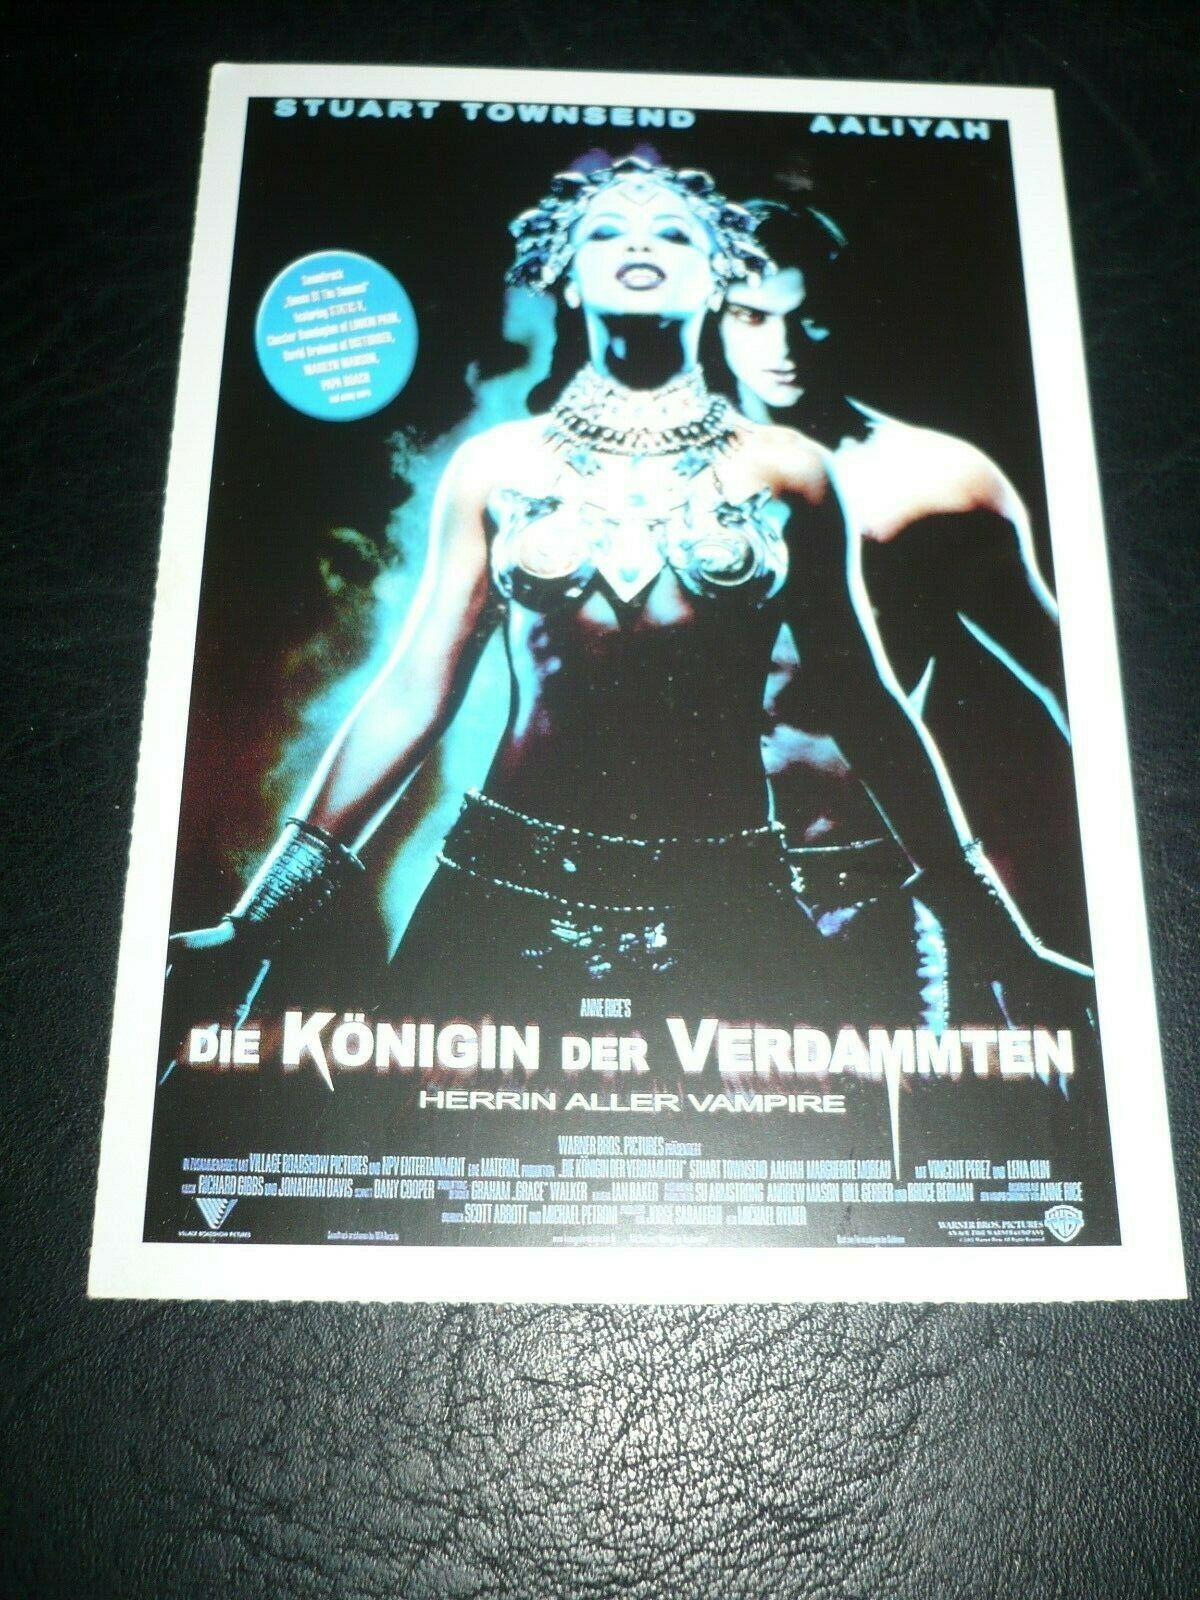 Queen Of The Damned, Film Card [aaliyah, Stuart Townsend]